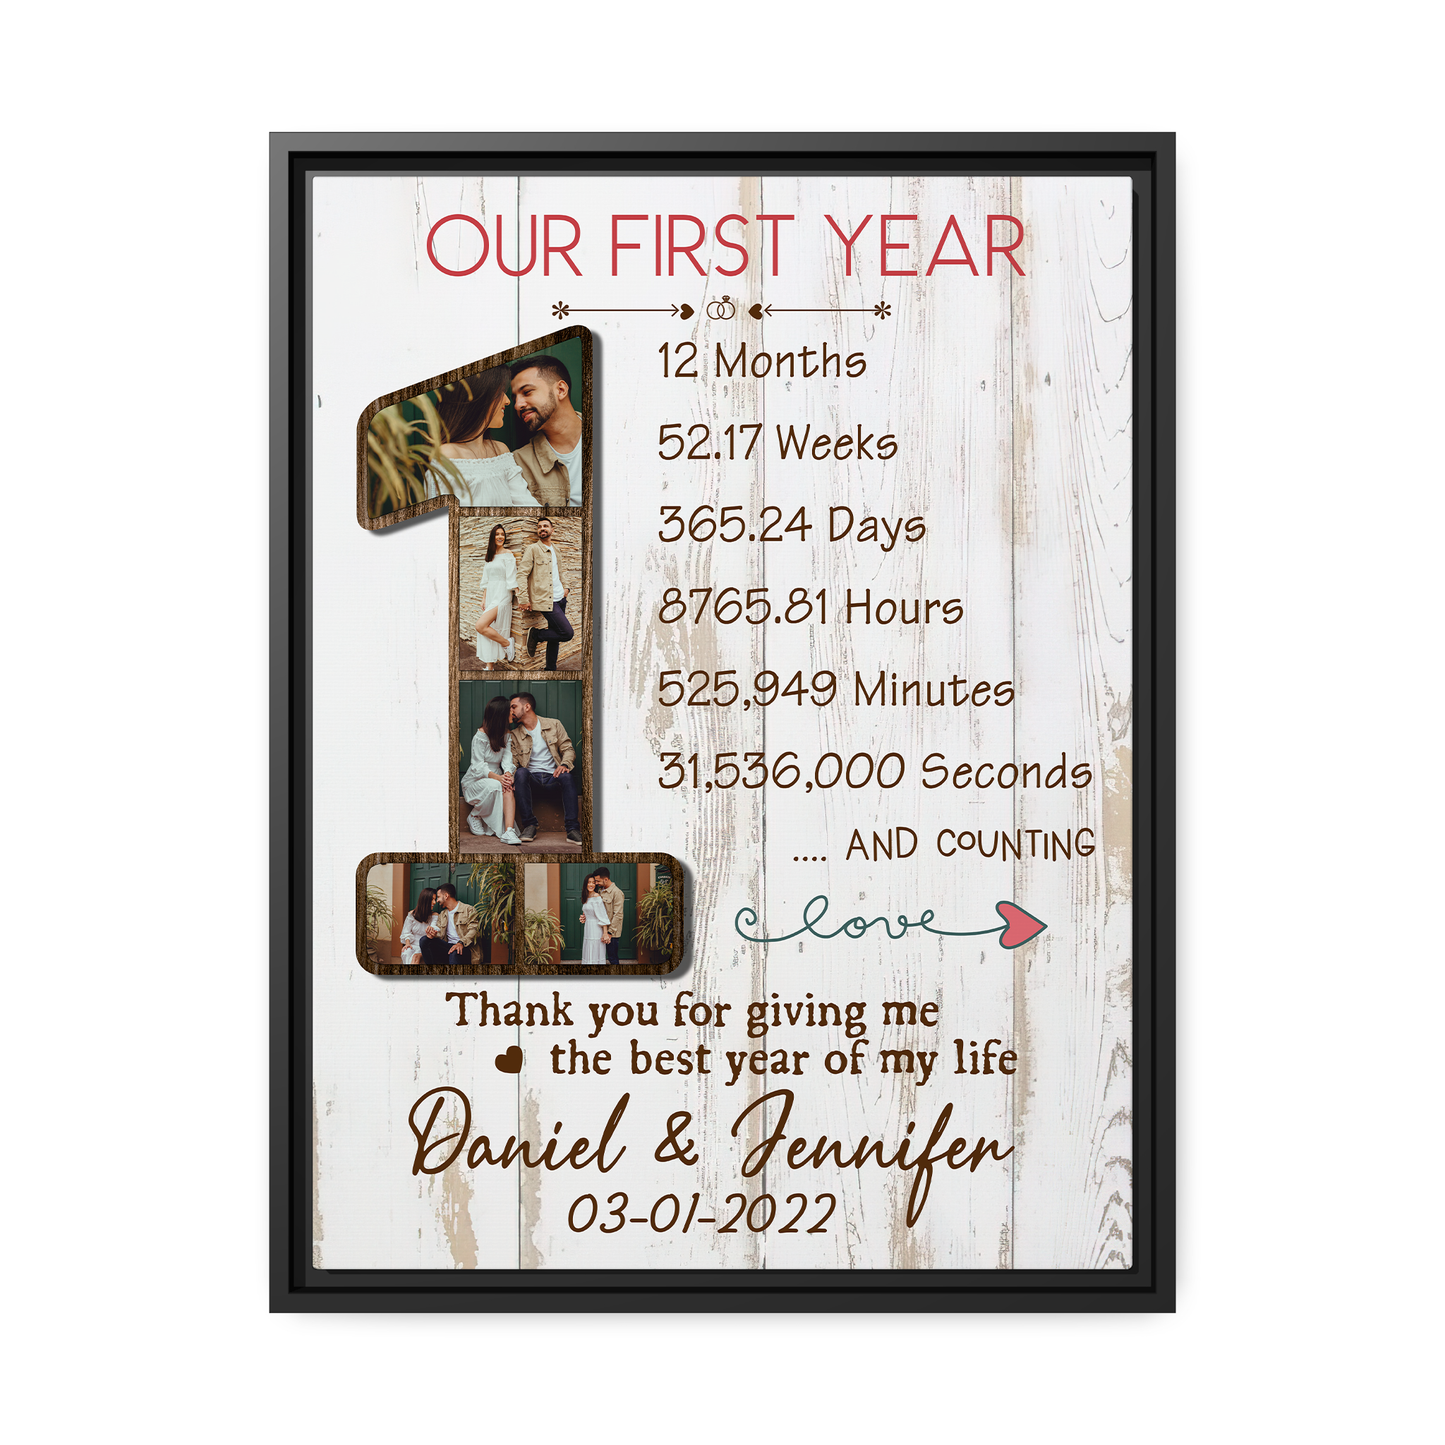 Personalized wedding anniversary gift for him for her - Our first year - custom Couple photo canvas print - MyMindfulGifts